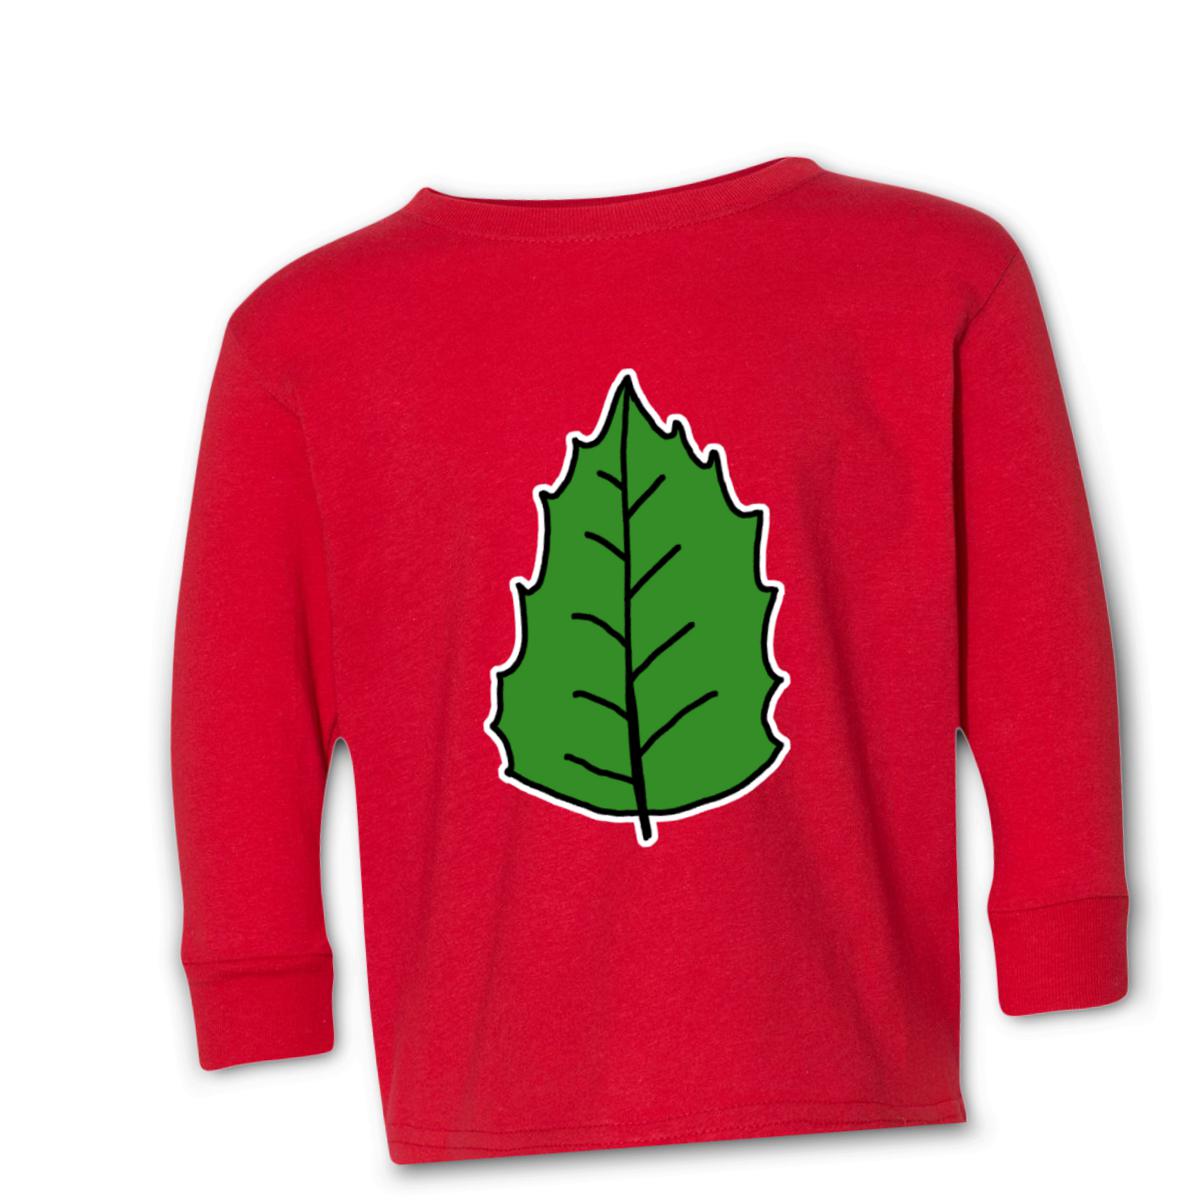 Holly Leaf Kid's Long Sleeve Tee Large red